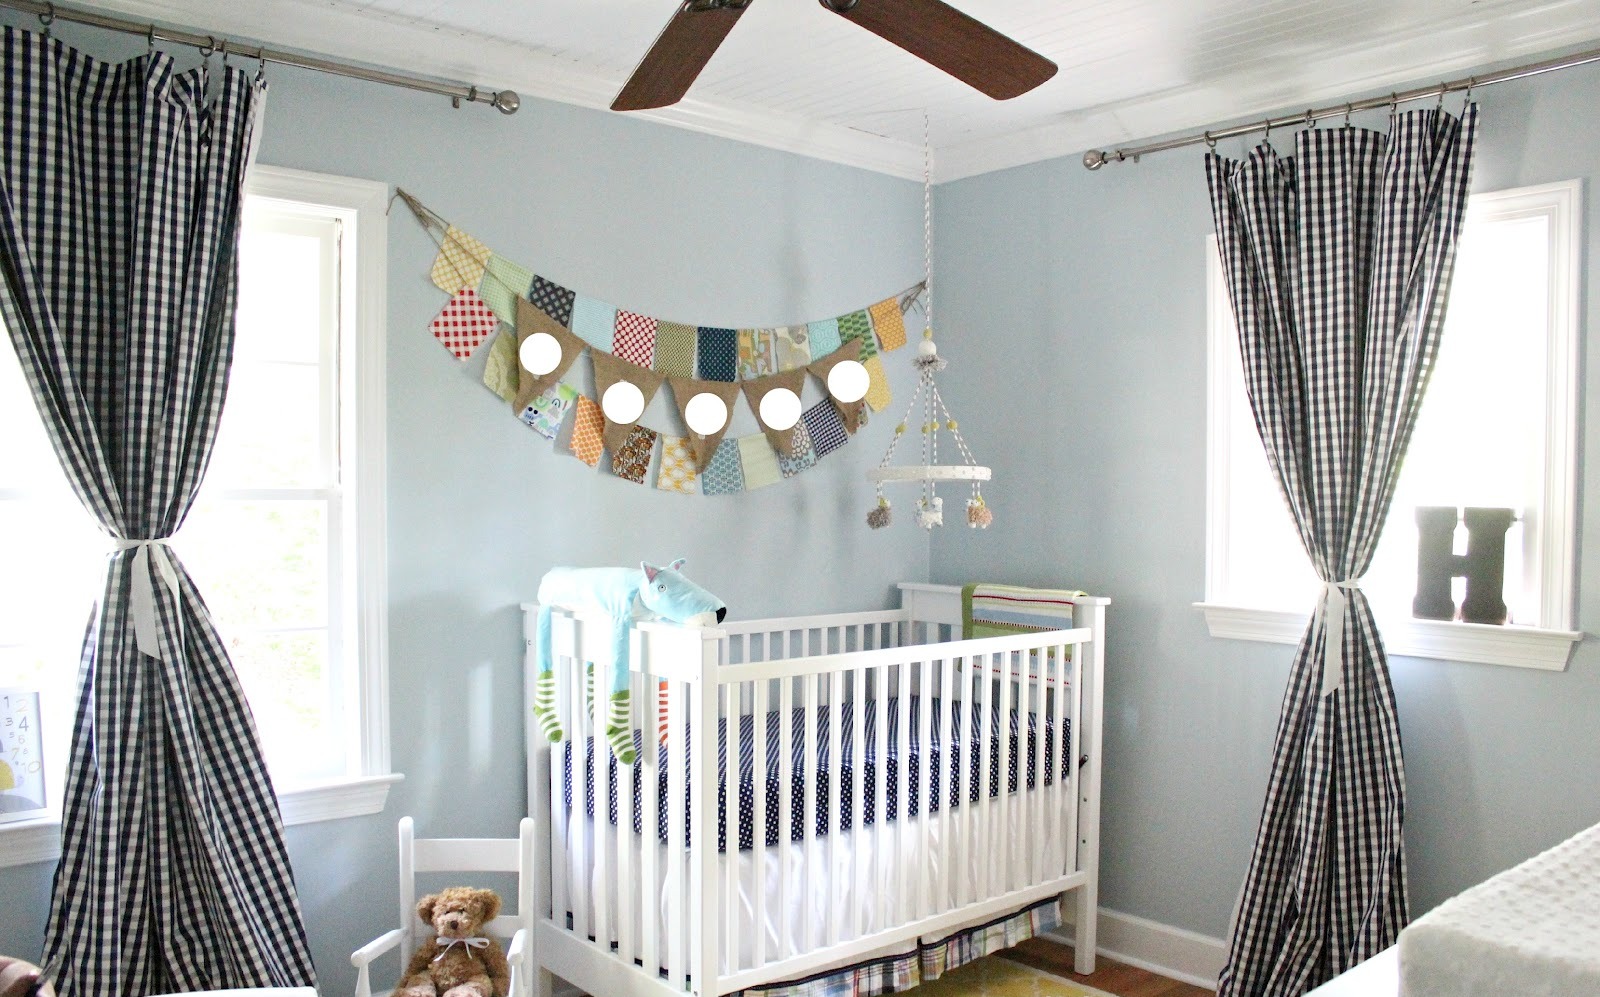 Pattern Curtain White Gingham Pattern Curtain And Cool White Crib Design Also Sophisticated Baby Boy Nursery Idea With Colorful Garland Decor Kids Room Awesome Baby Boy Nursery Room Ideas